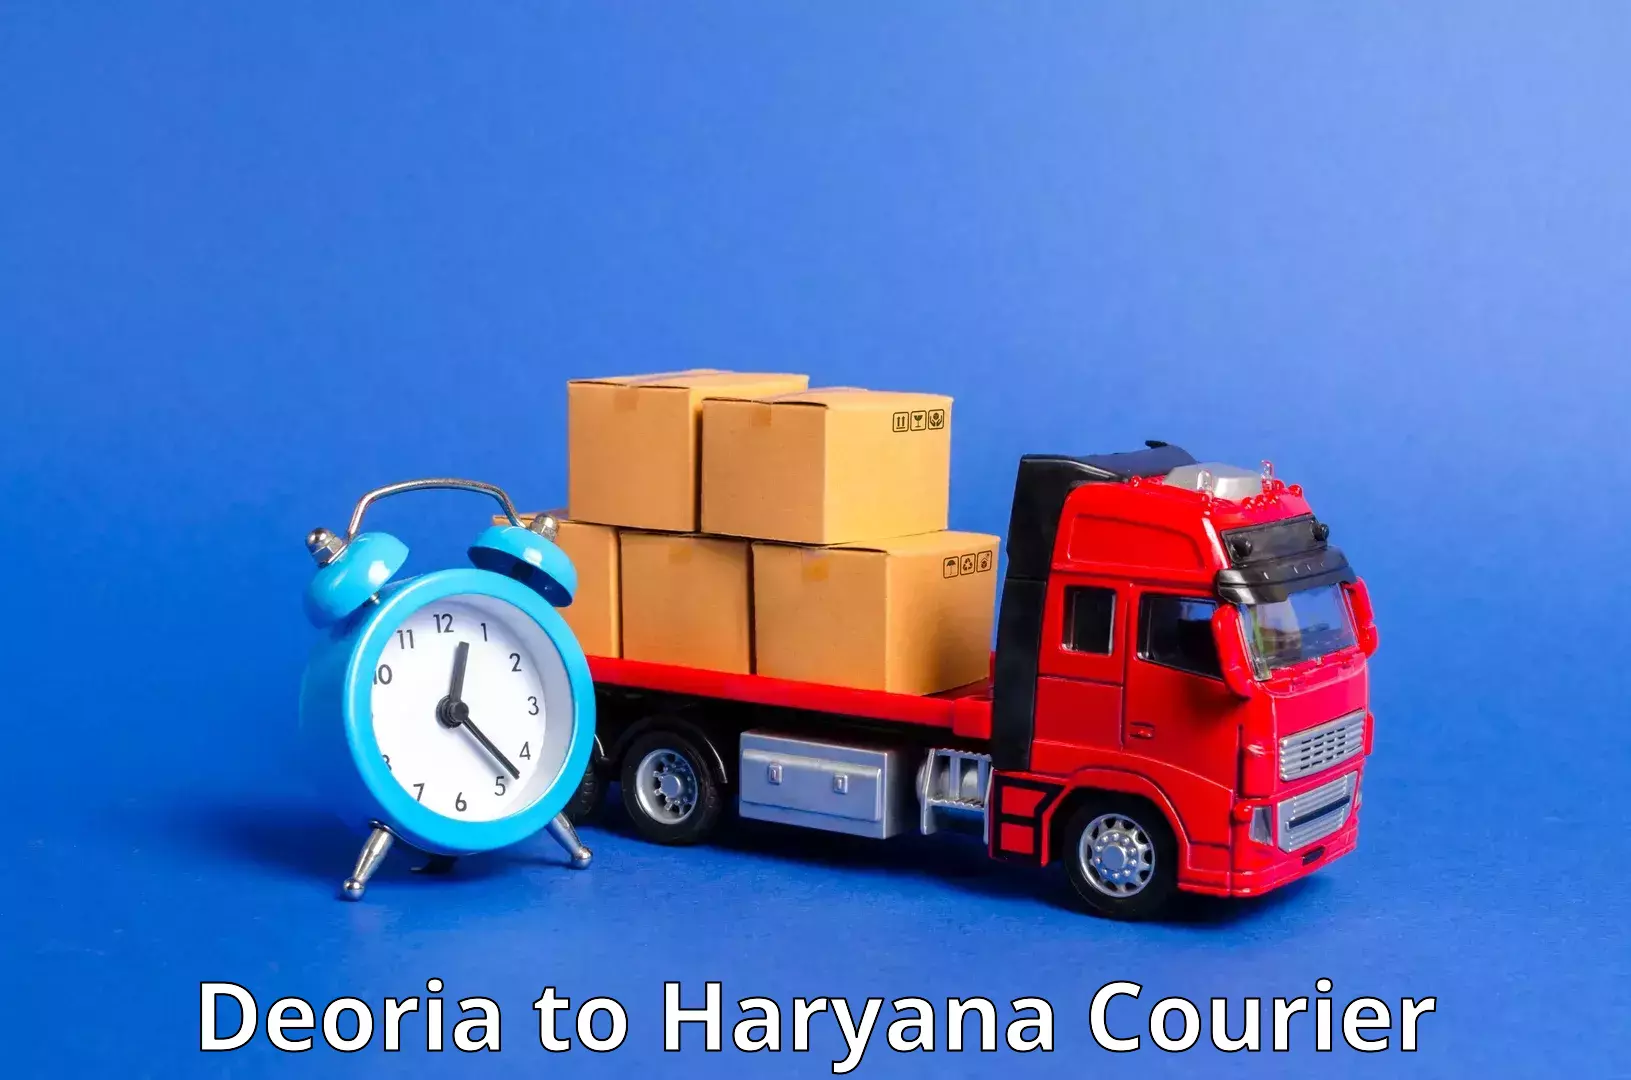 24/7 courier service Deoria to Fatehabad